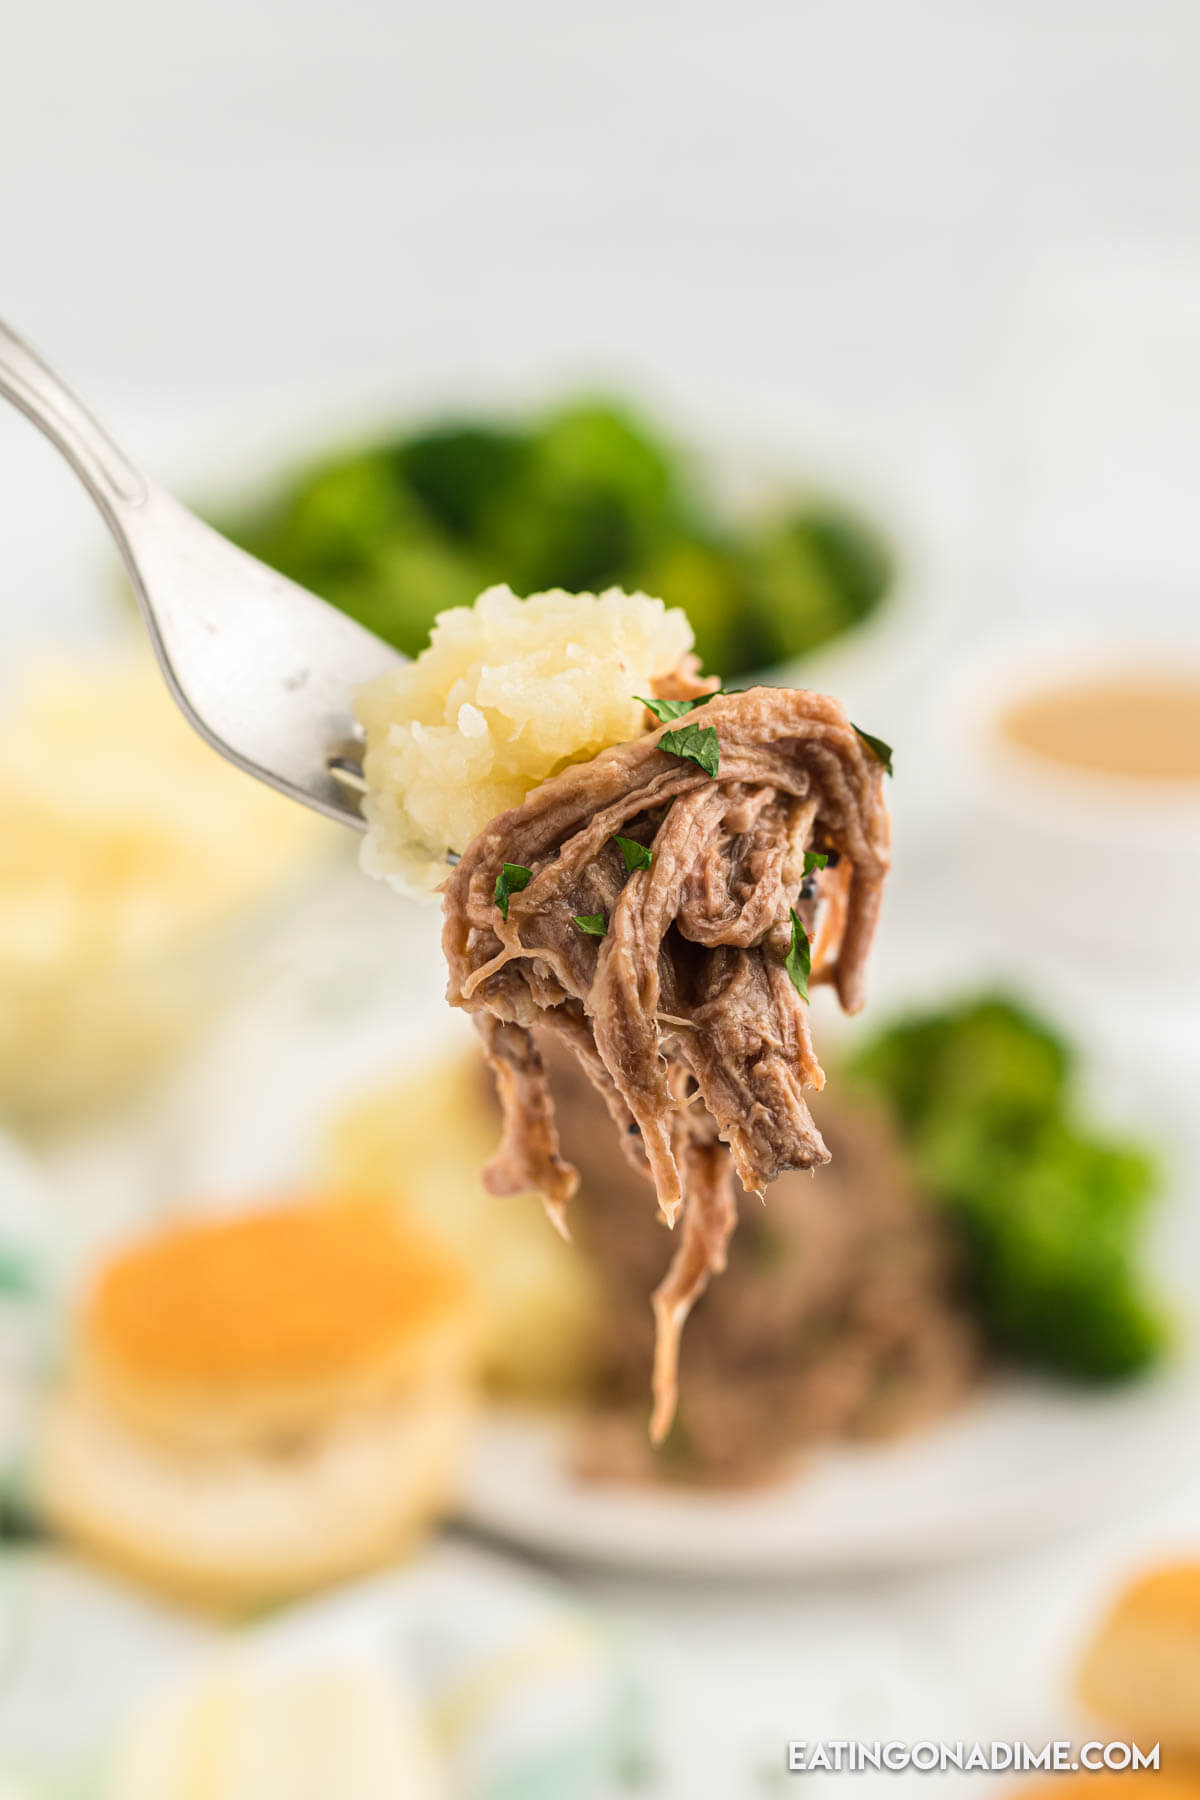 A serving of shredded beef and mashed potatoes on a fork